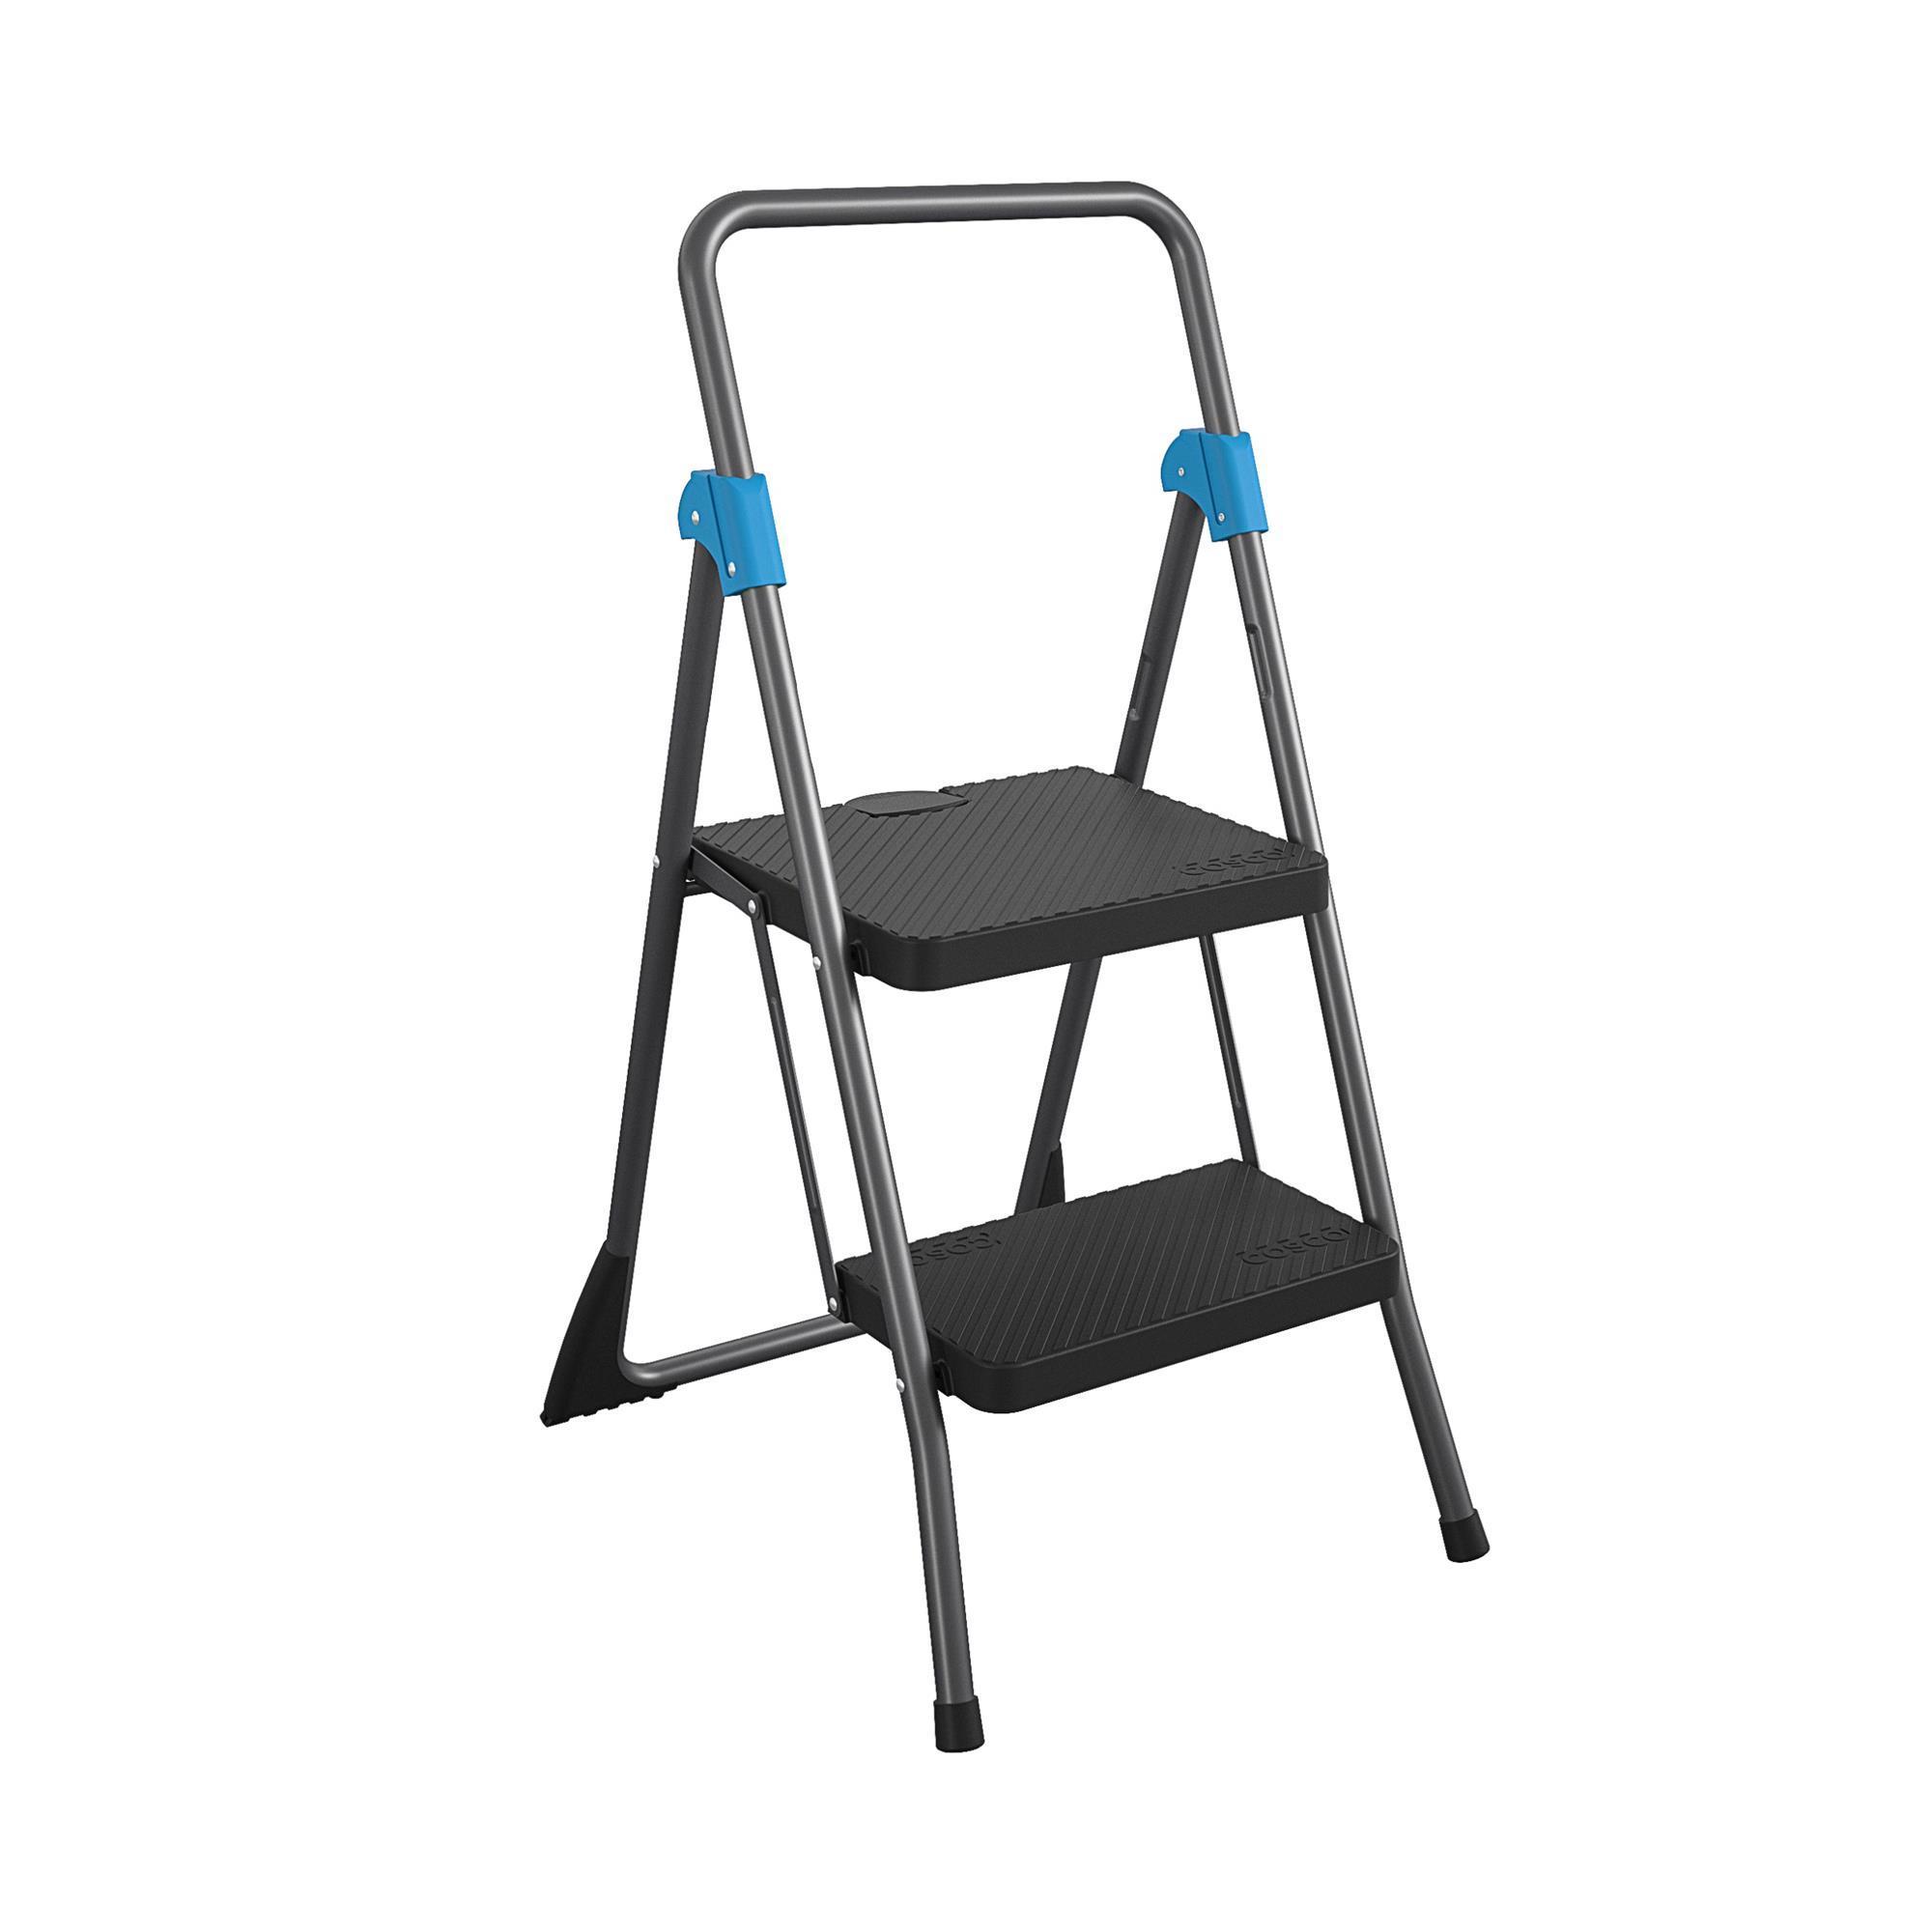 Cosco, 2 Step Folding Step Stool, Height 41.81 ft, Capacity 300 lb, Material Steel, Model 11829GGB